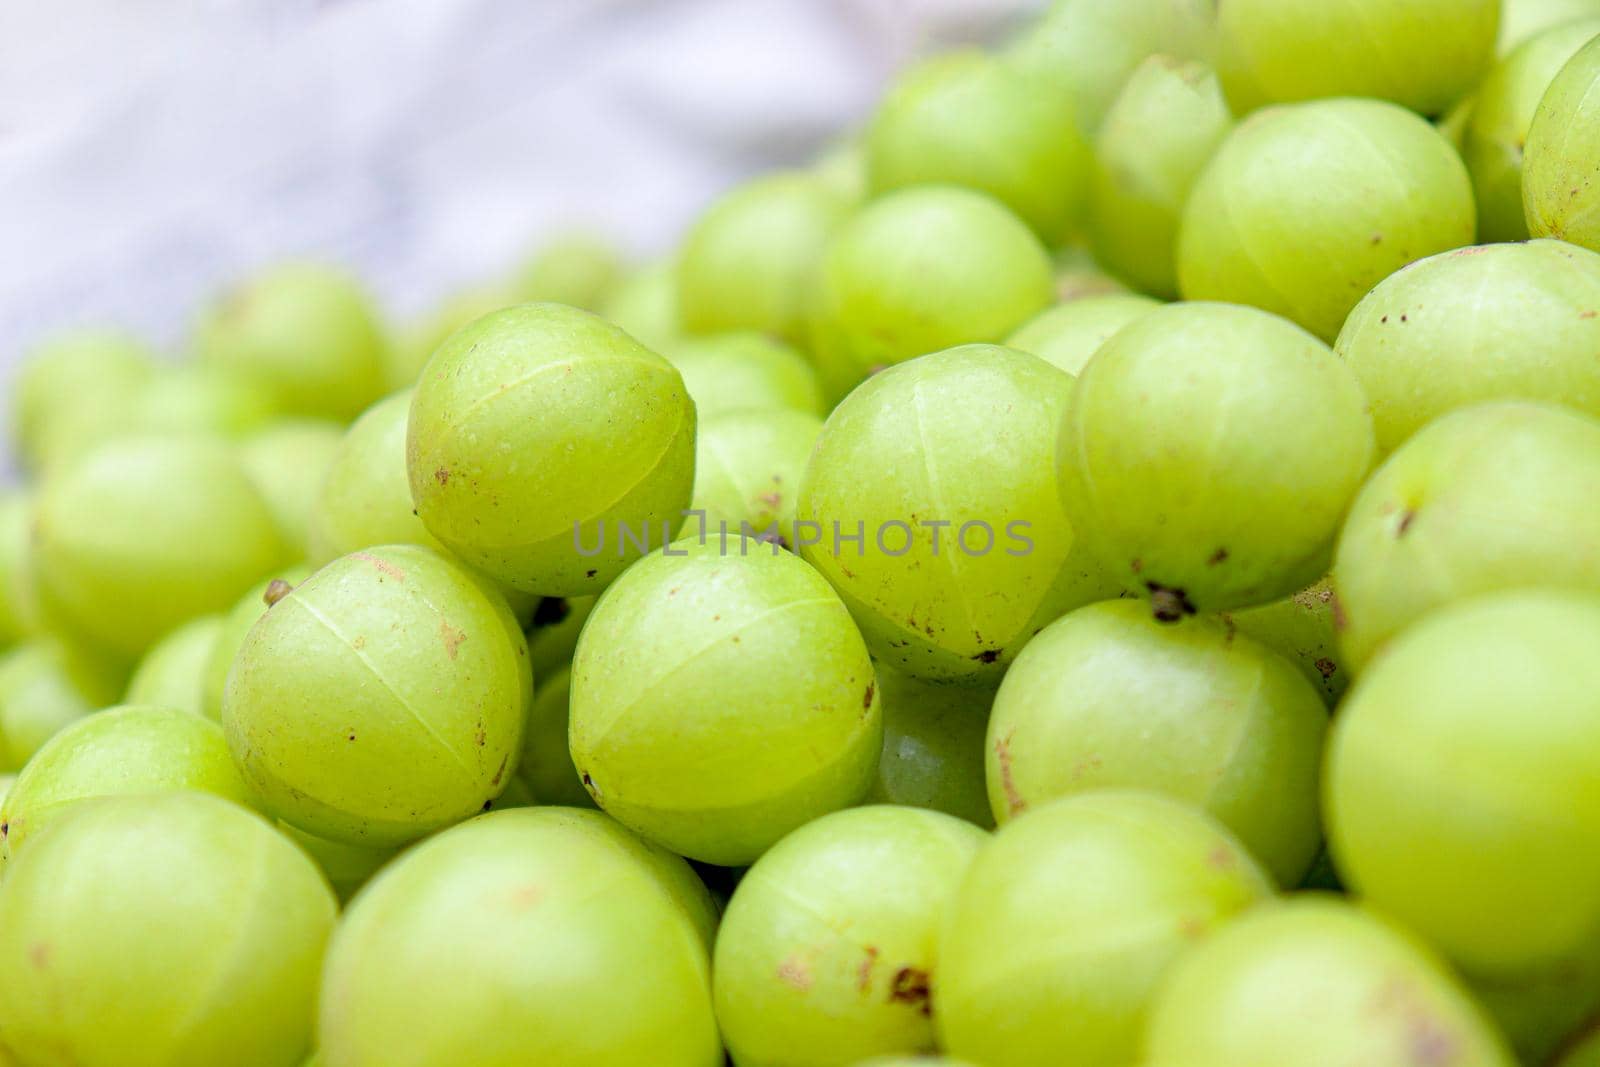 gooseberry stock on shop for sell by jahidul2358